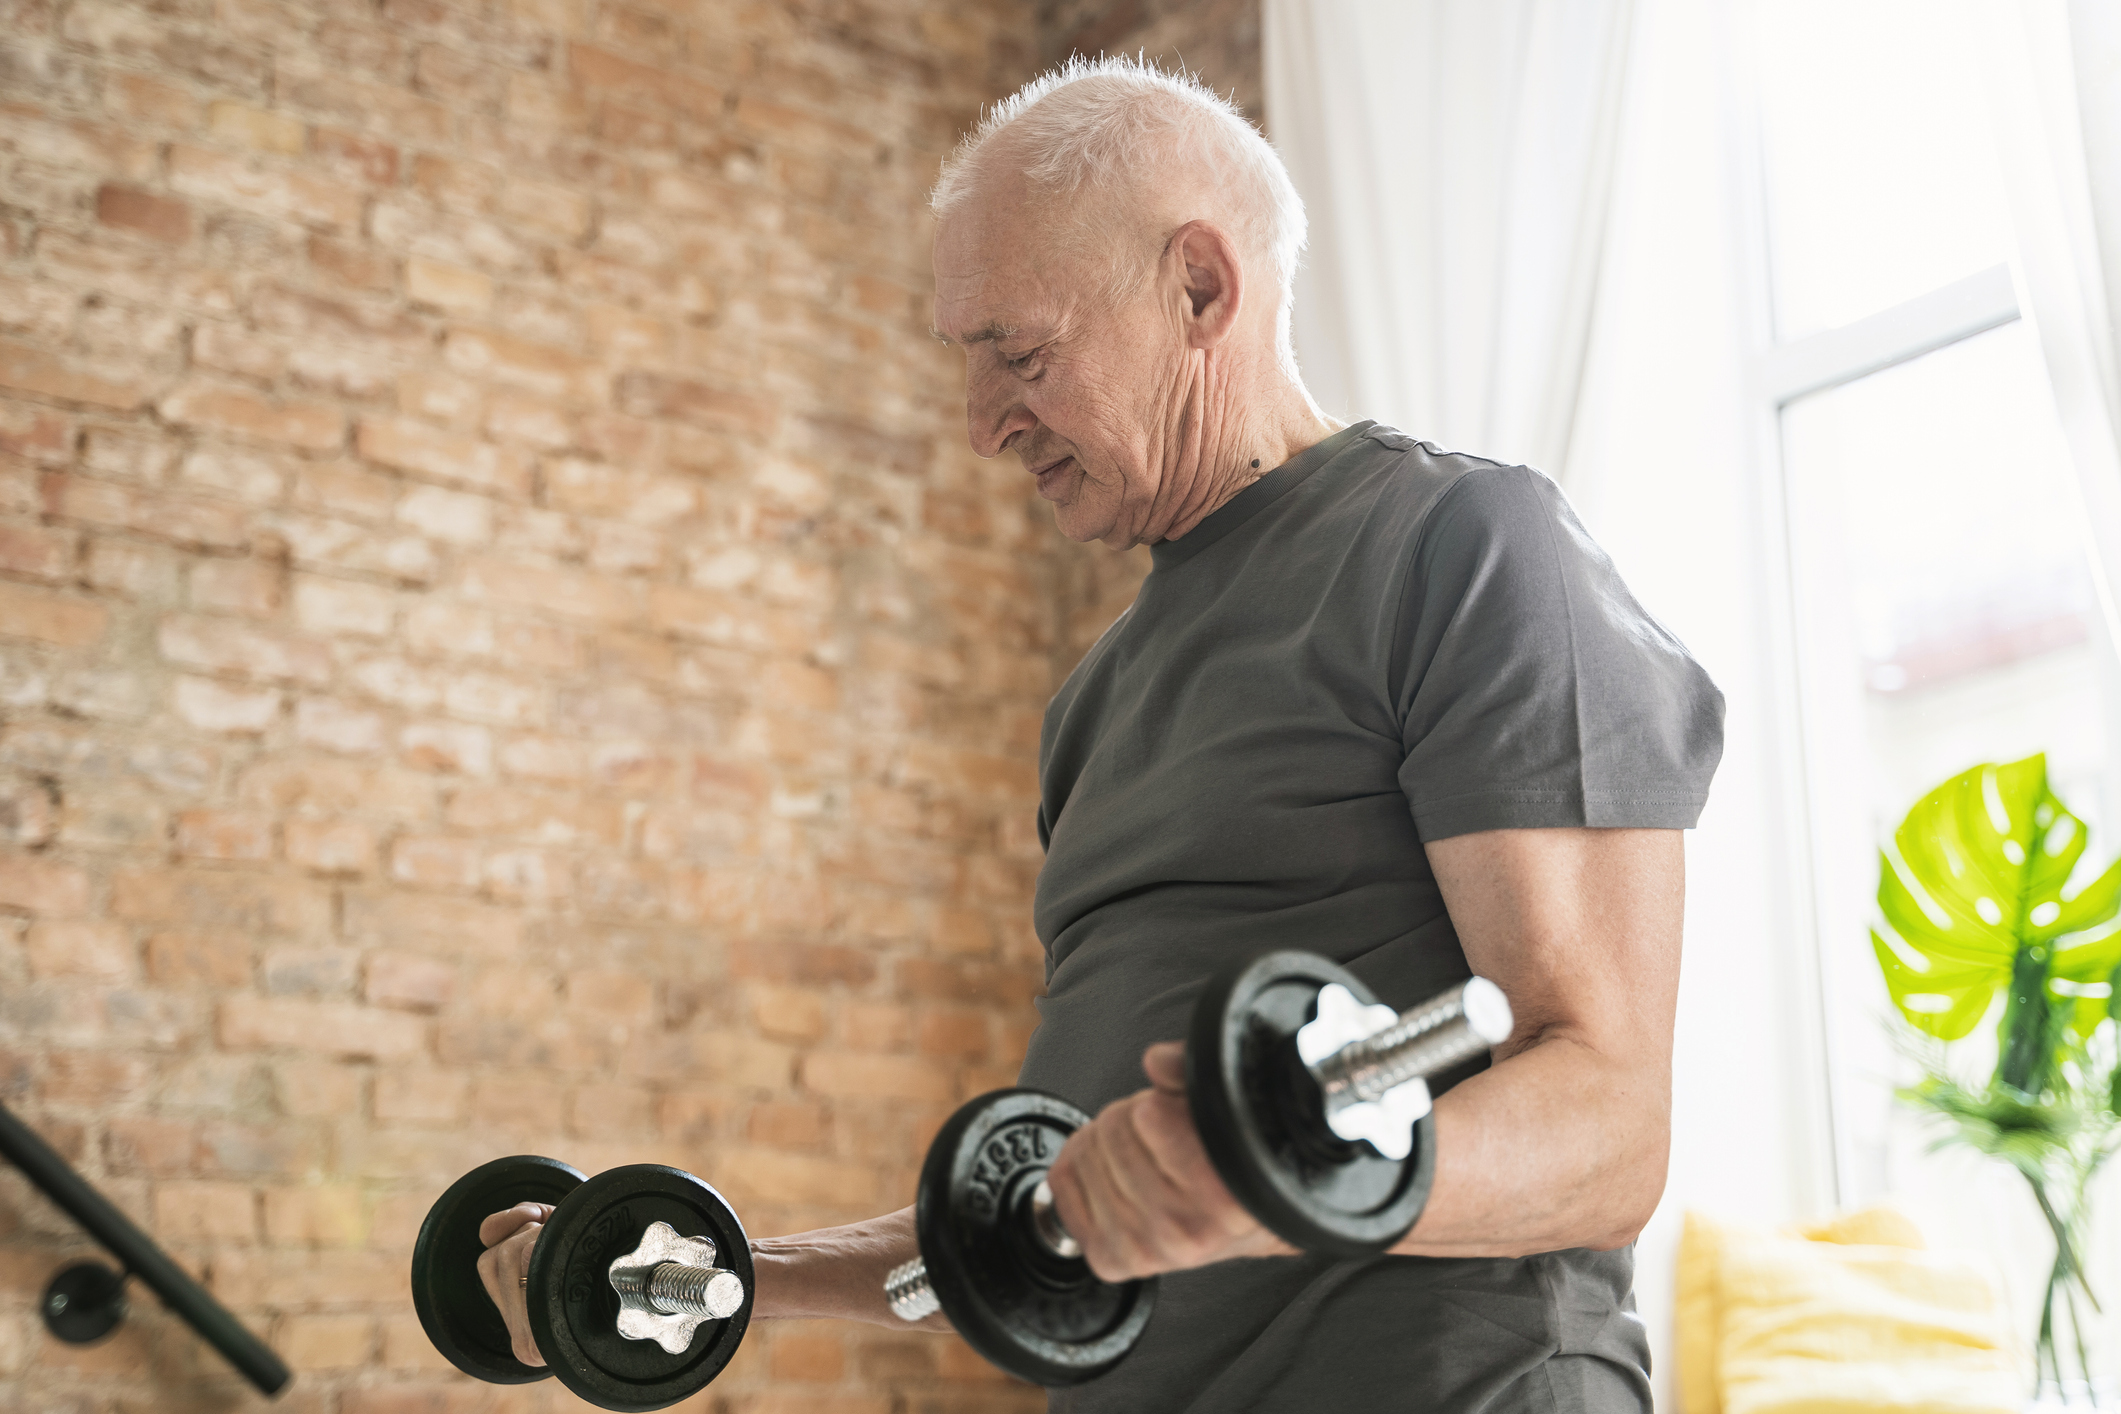 The Ultimate At-Home Dumbbell Workout for People Over 50